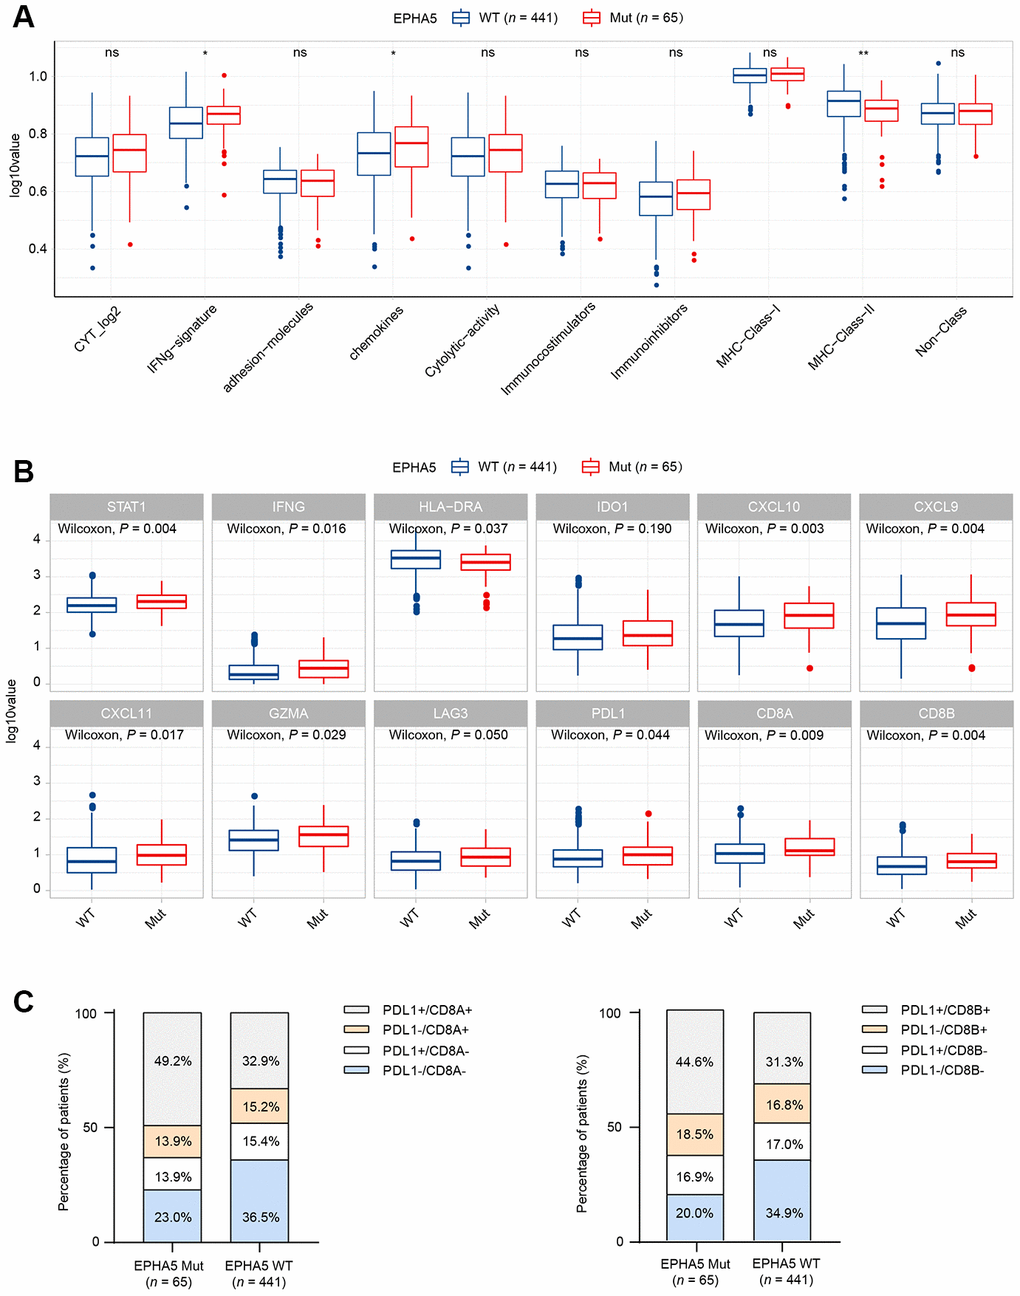 Alterations in EPHA5 are associated with enhanced immunity in the TCGA LUAD cohort. (A) IFN-γ and chemokine signatures were enriched in EPHA5-Mut tumors. The ordinate log10value represents log10(ssGSEA score+1). (B) The expression levels of immune checkpoint inhibitor genes were significantly higher in EPHA5-Mut tumors than in EPHA5-WT tumors. The ordinate log10value represents log10(TPM+1). (C) A higher proportion of PDL1+/CD8+ cells was observed in EPHA5-Mut tumors than in EPHA5-WT tumors.